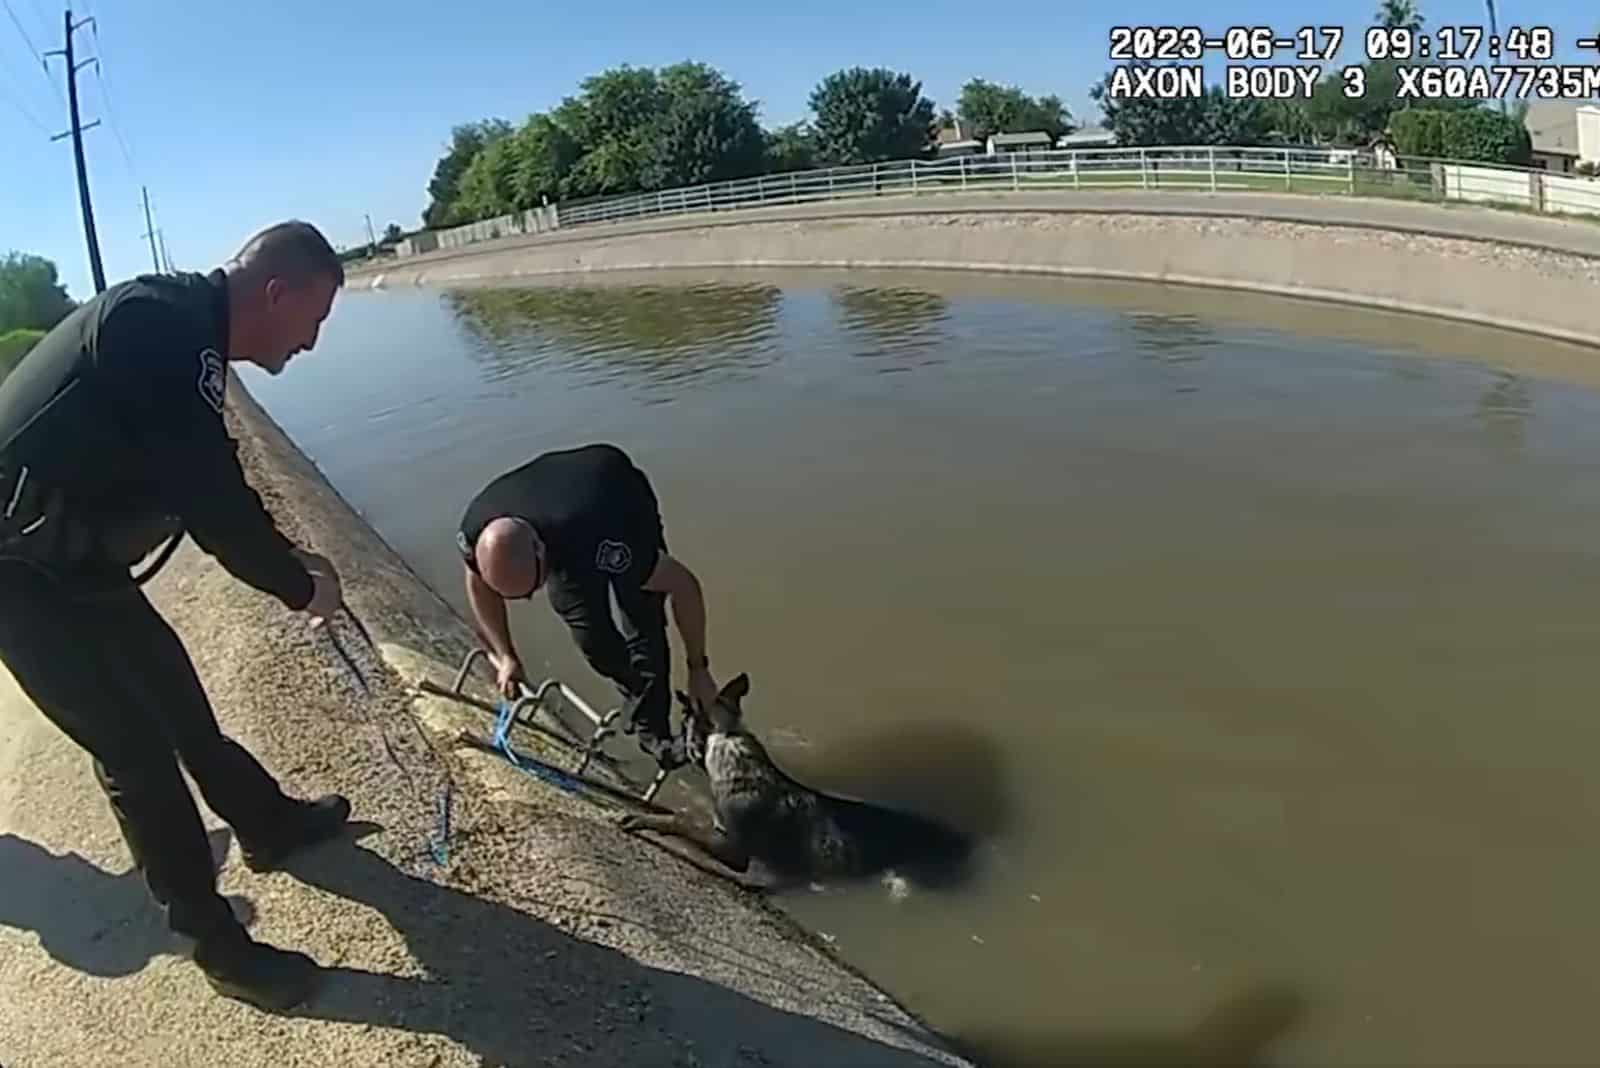 police officers rescuing dog from canal